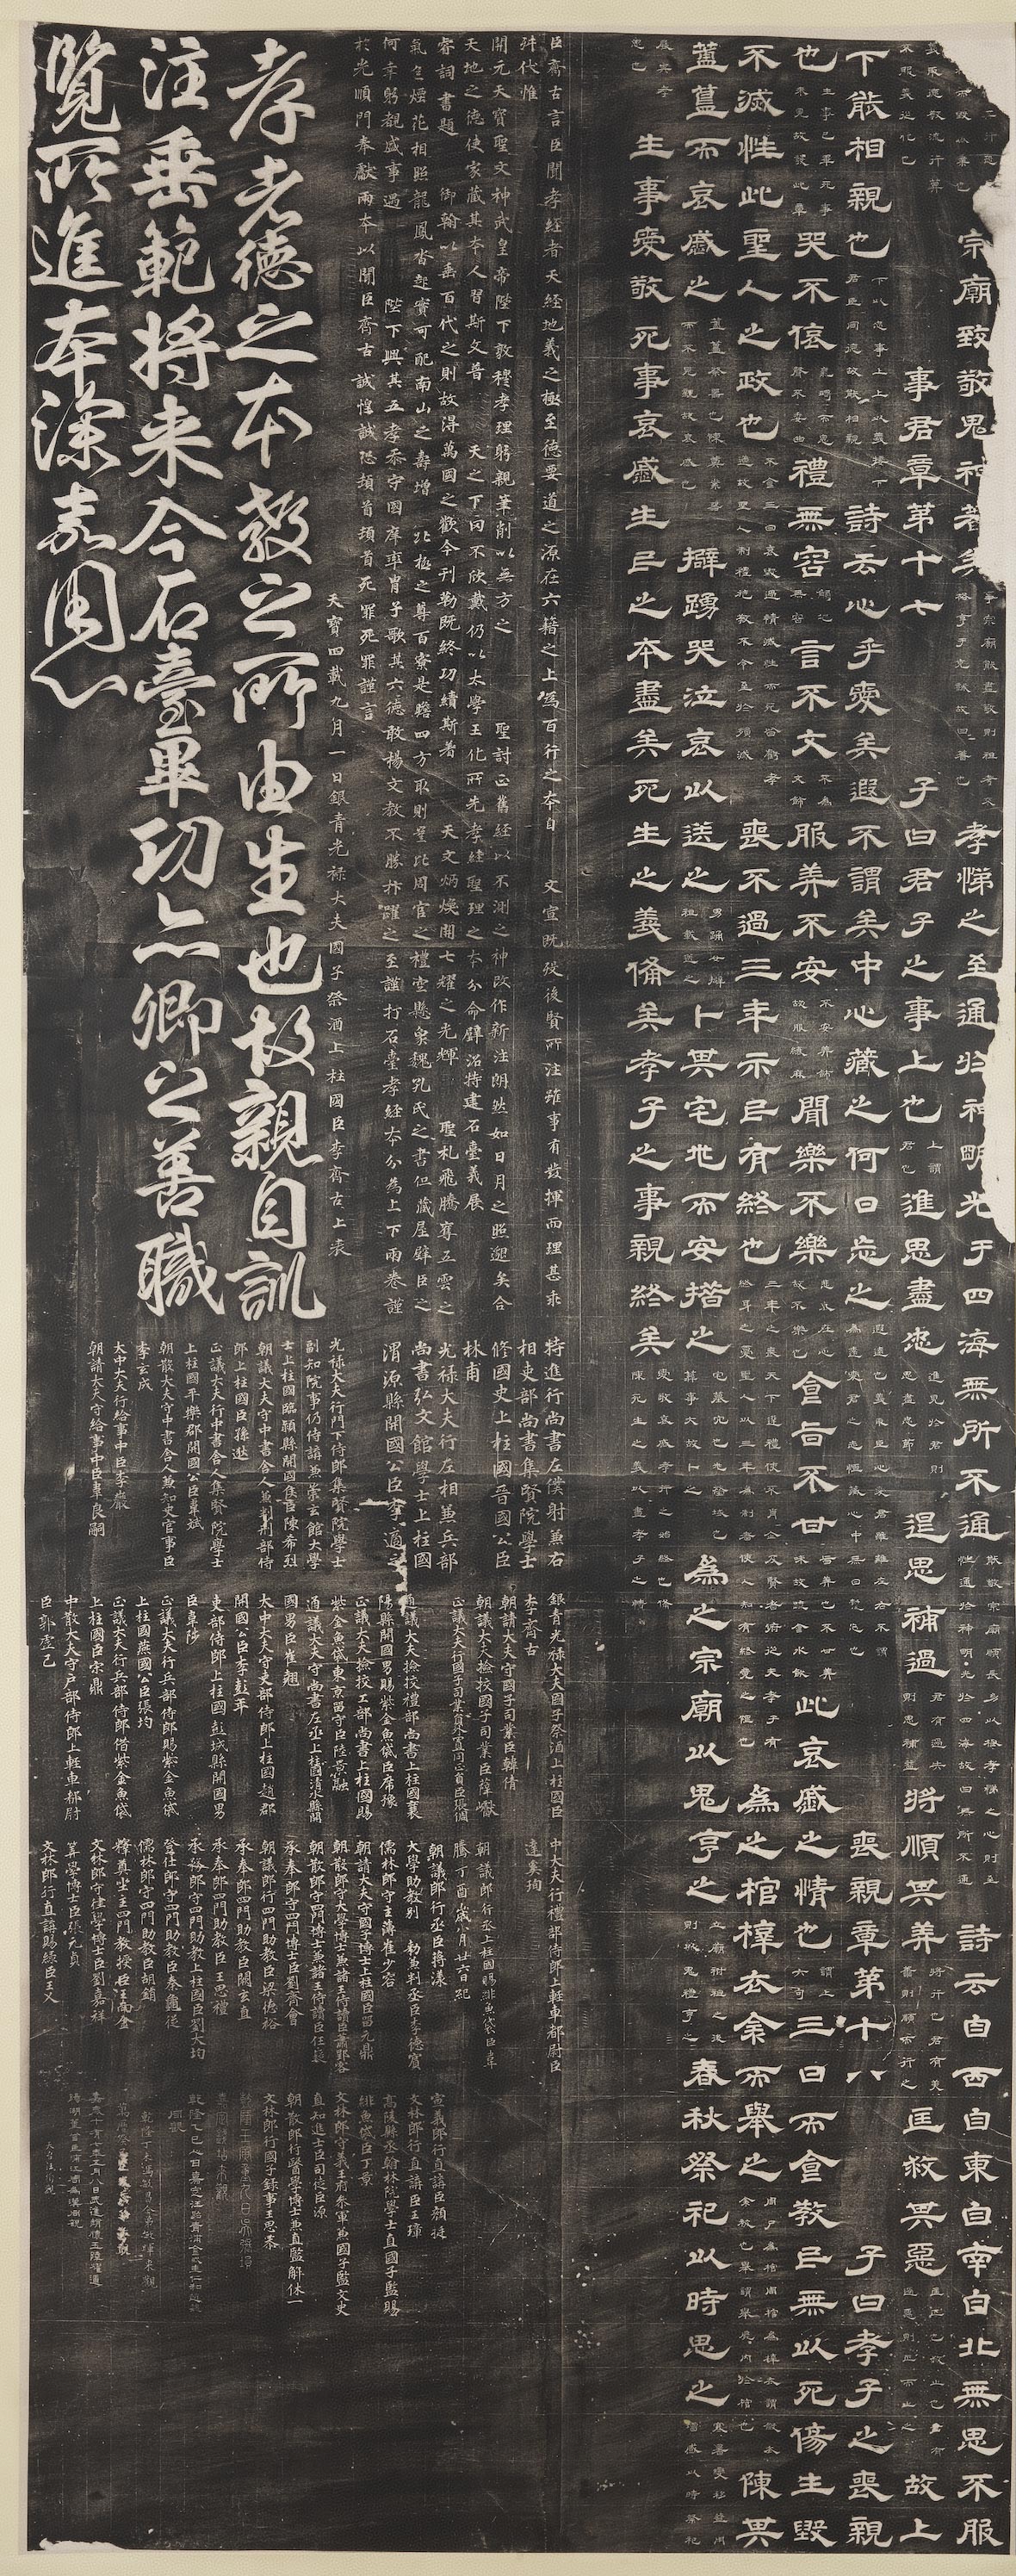 Rubbing of The Classic of Filial Piety in Stone